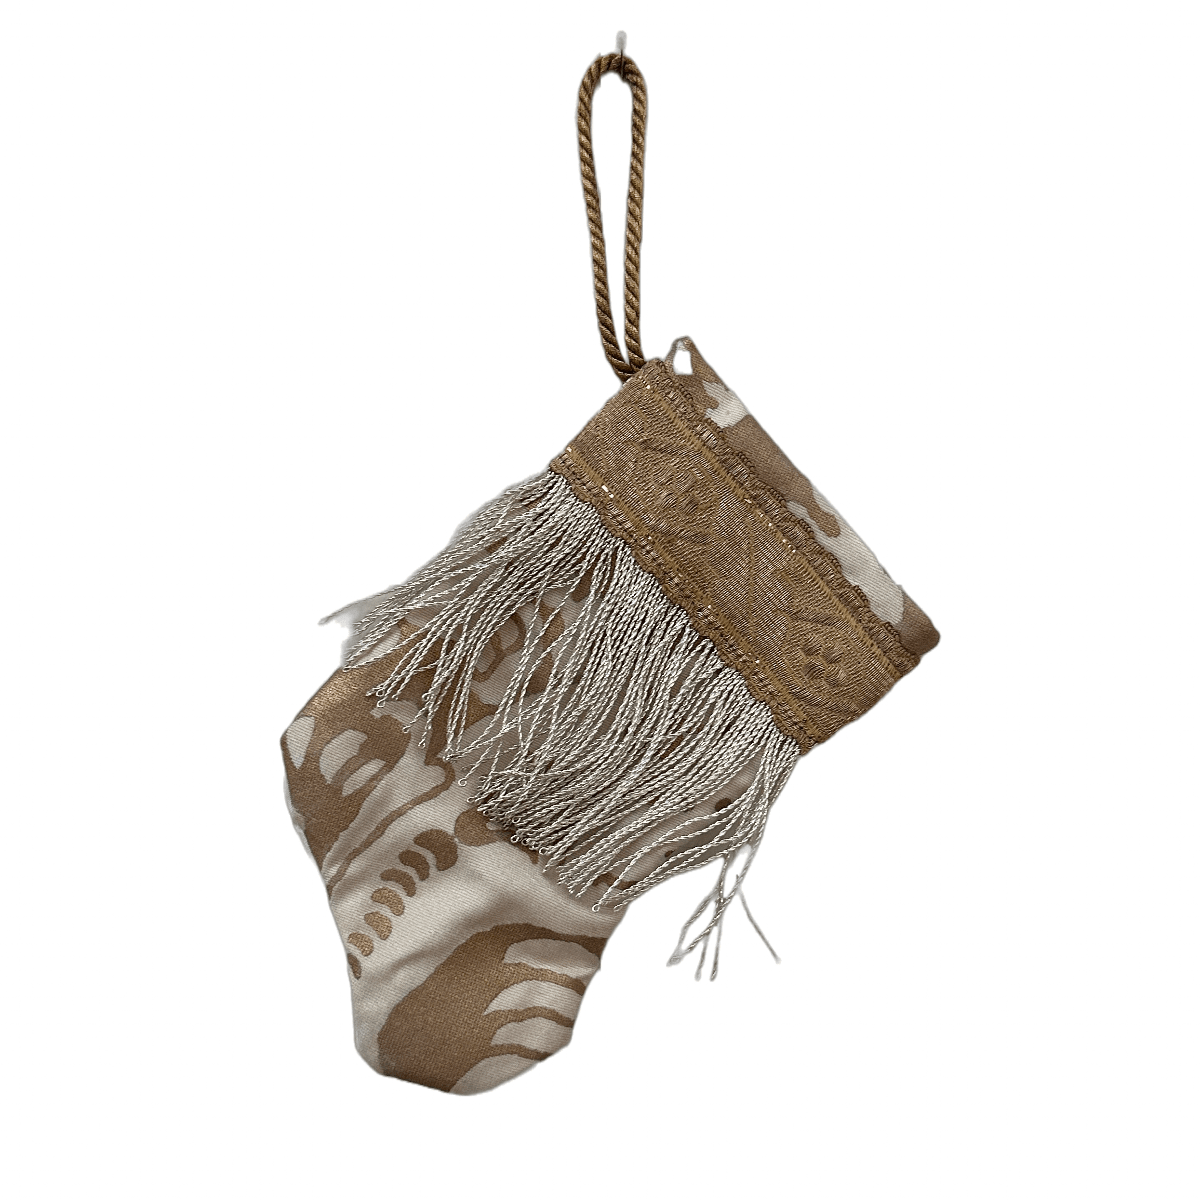 Handmade Mini Stocking Ornament from Antique & Vintage Textiles, Trims | White and Gold Fortuny Ornament B. Viz Design A 